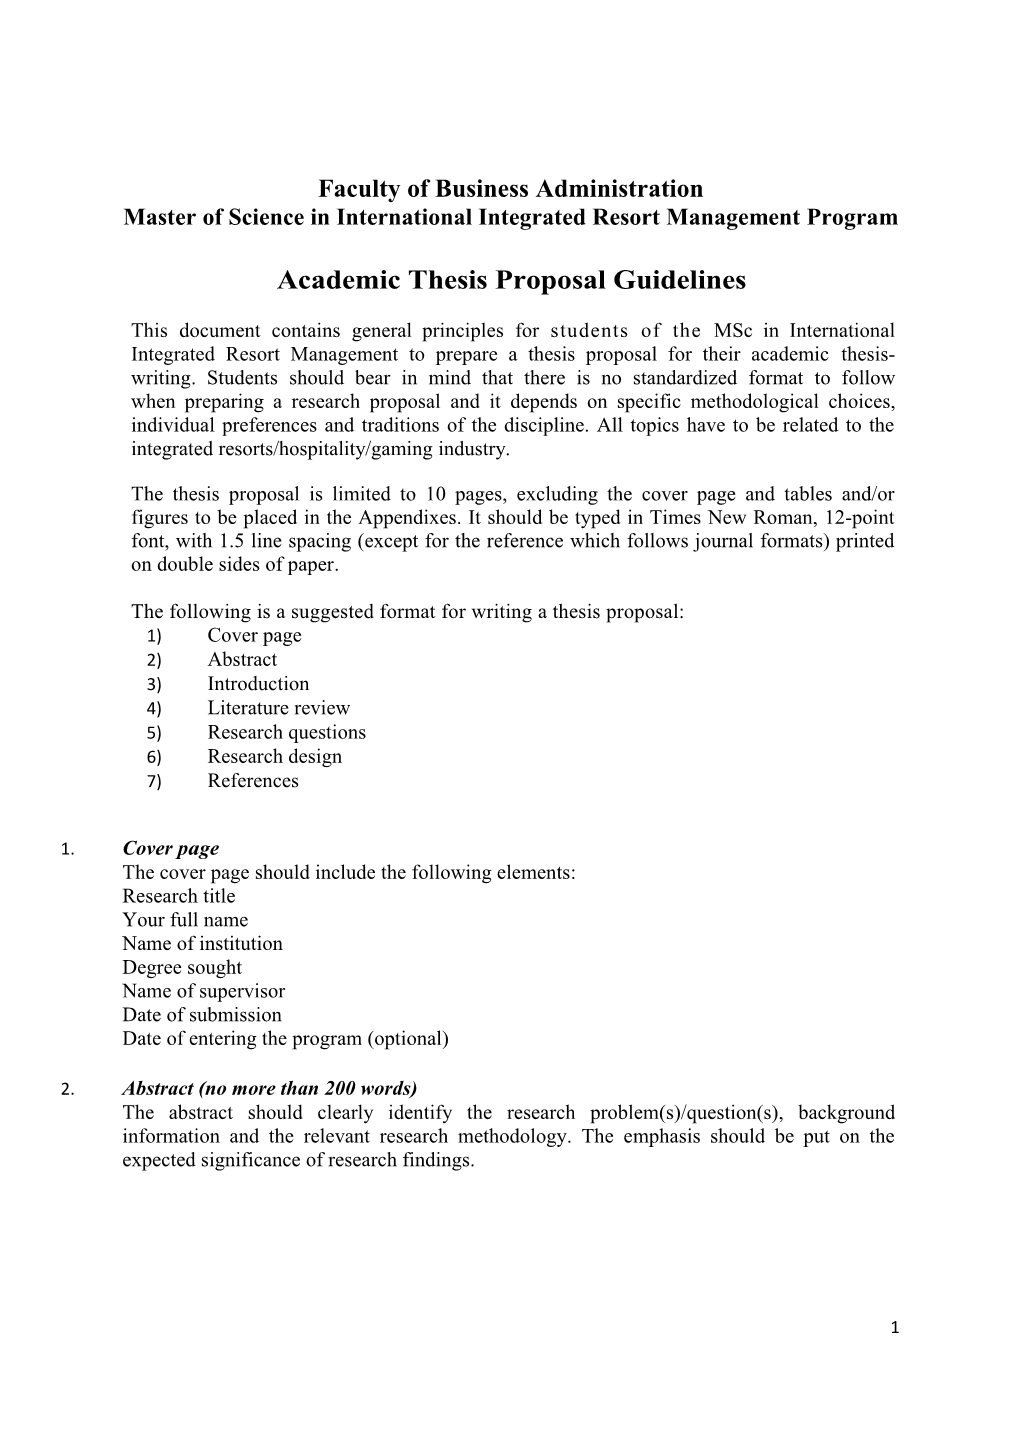 Thesis Proposal Guideline - Revised MBB Program